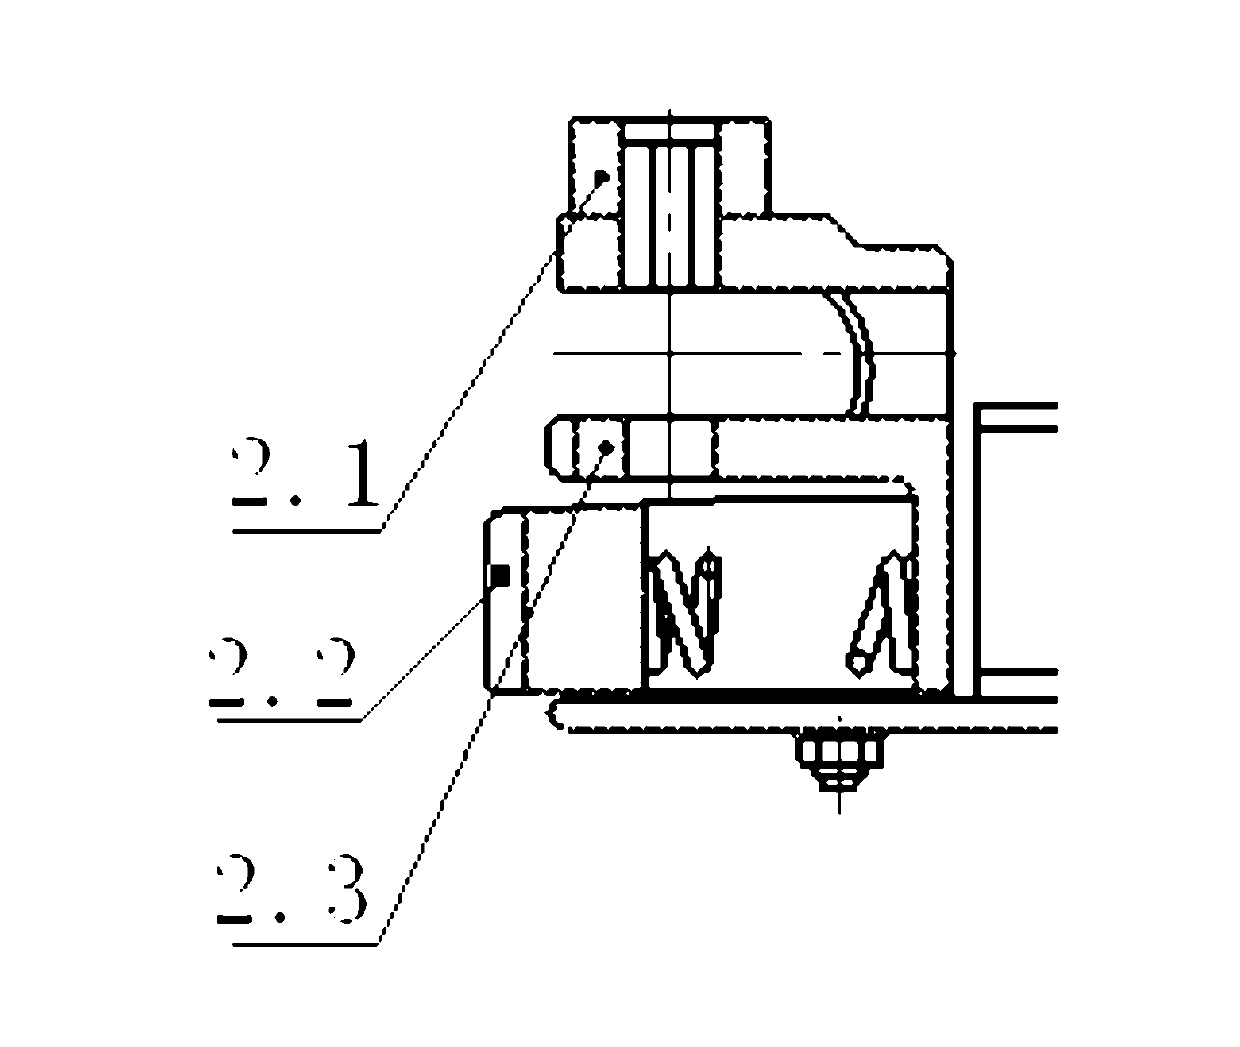 Method for transporting road rail iron in mine and road rail iron transport vehicle